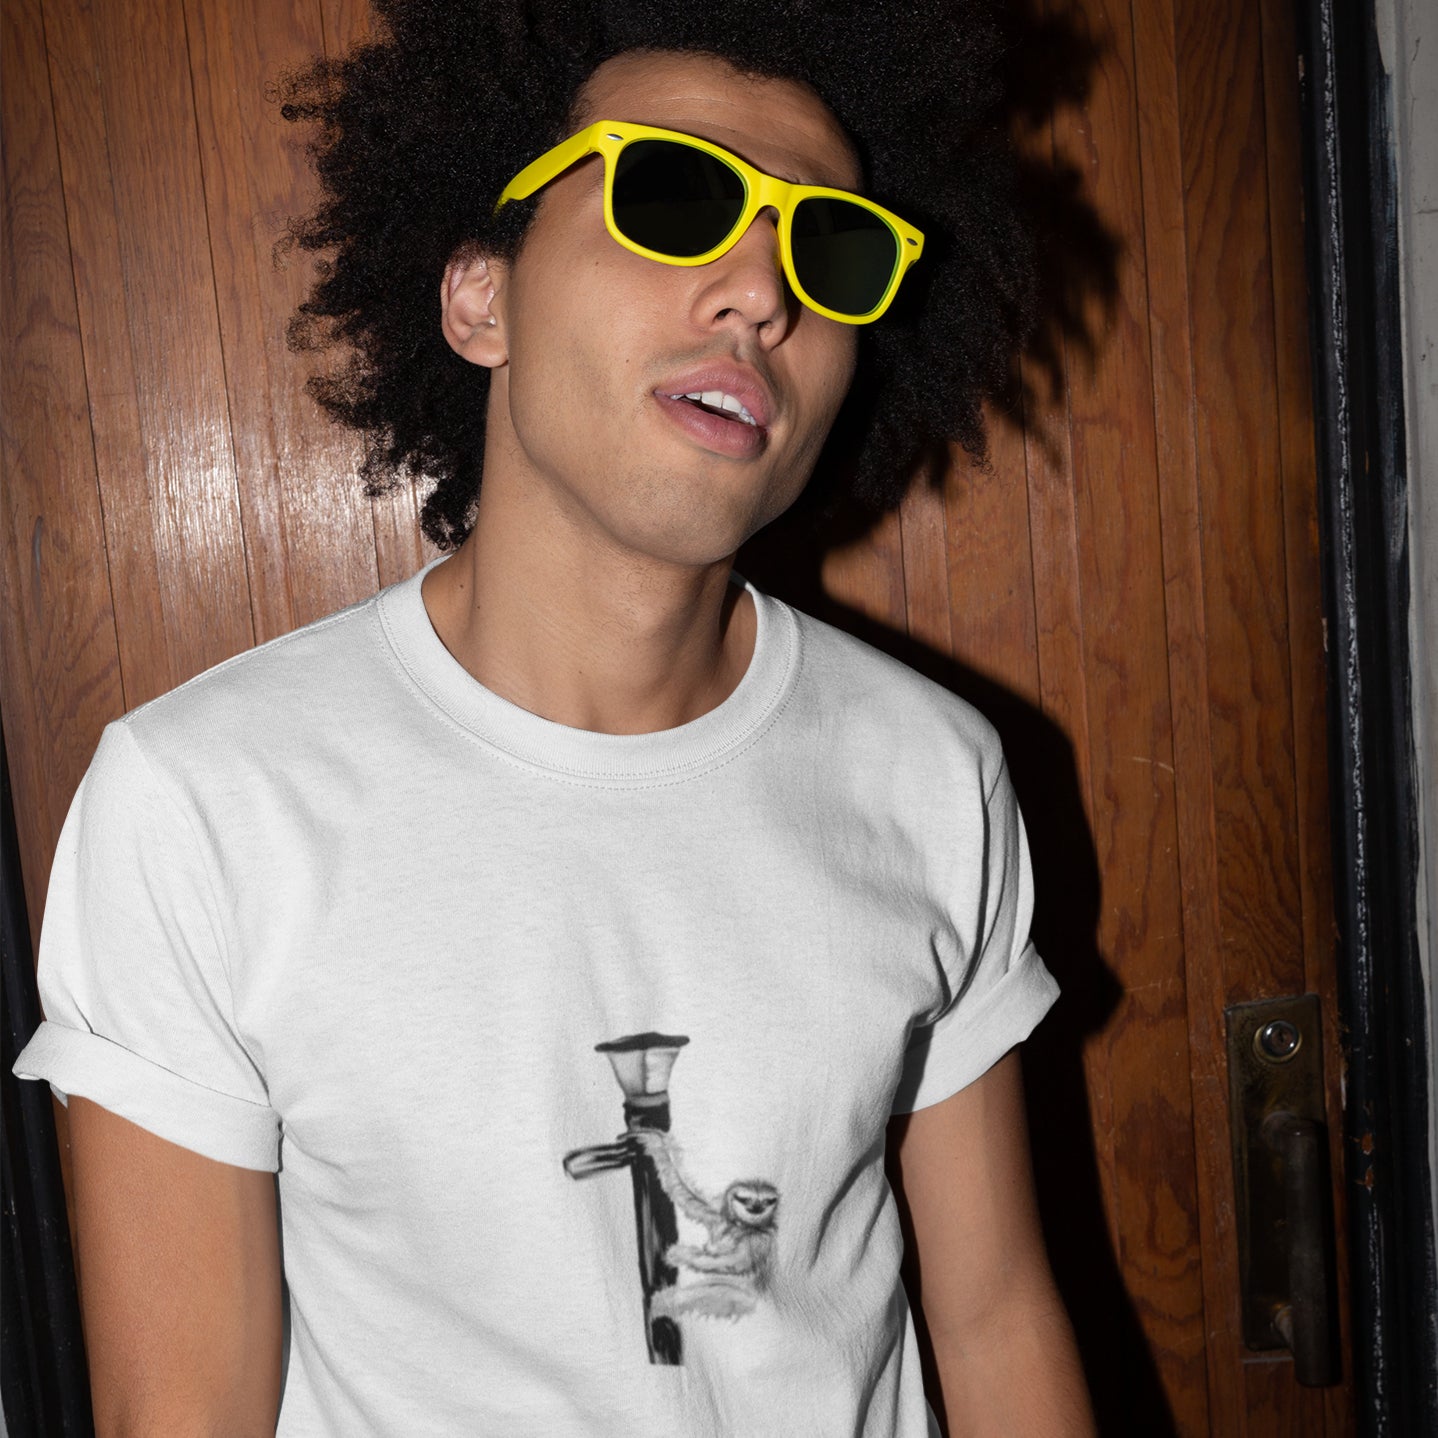 Sloth | 100% Organic Cotton T Shirt worn by a man with sunglasses